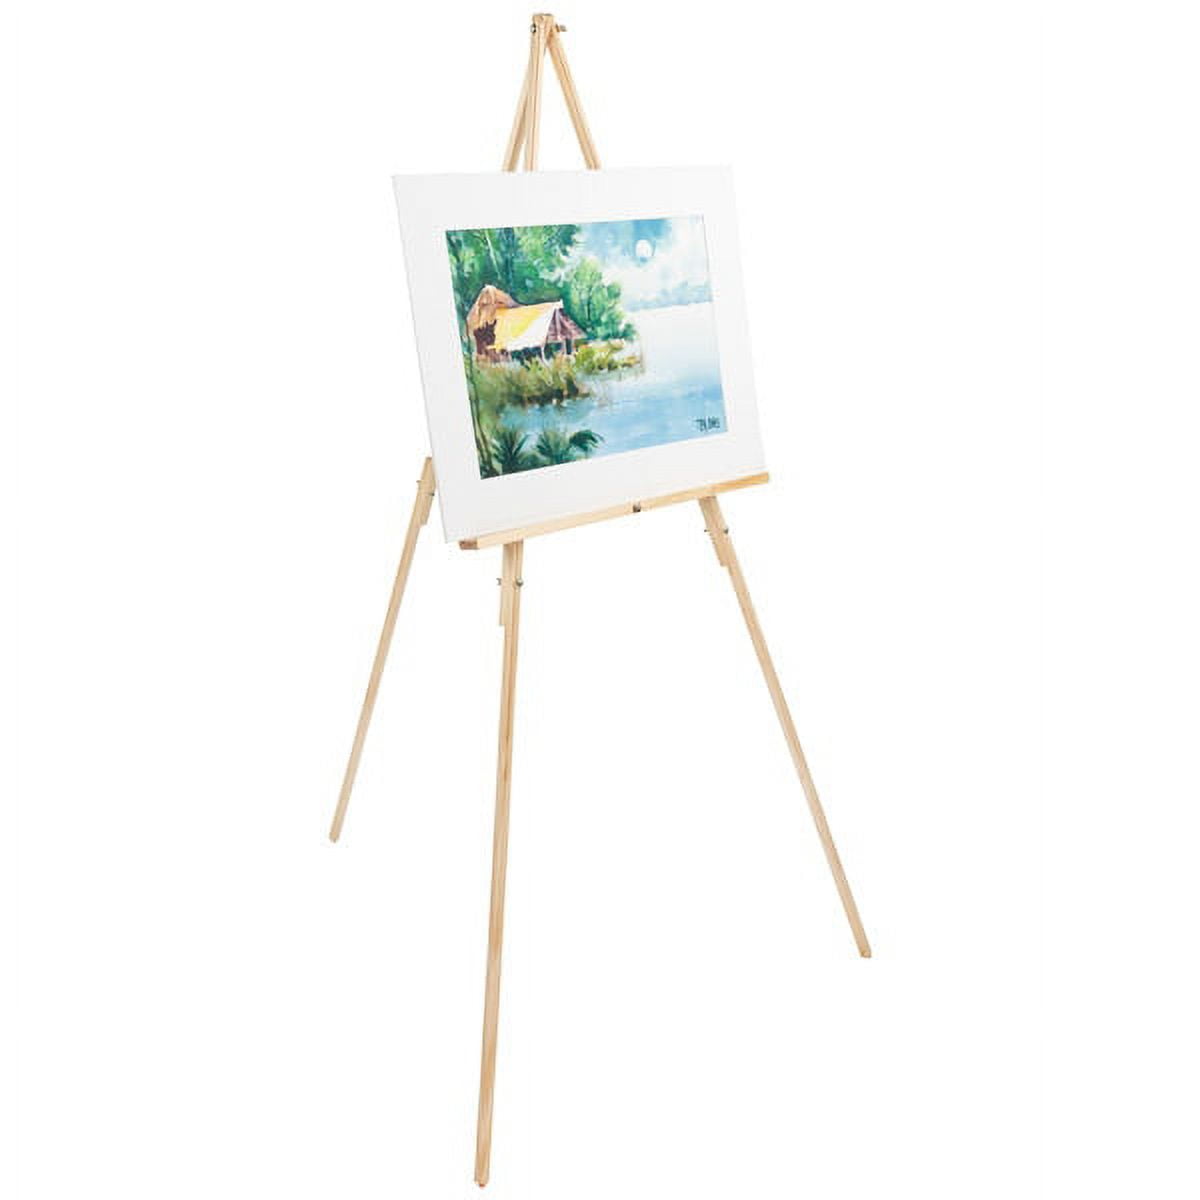 2 Packs Easel Stand for Display 66 Inch Folding Portable Easel for